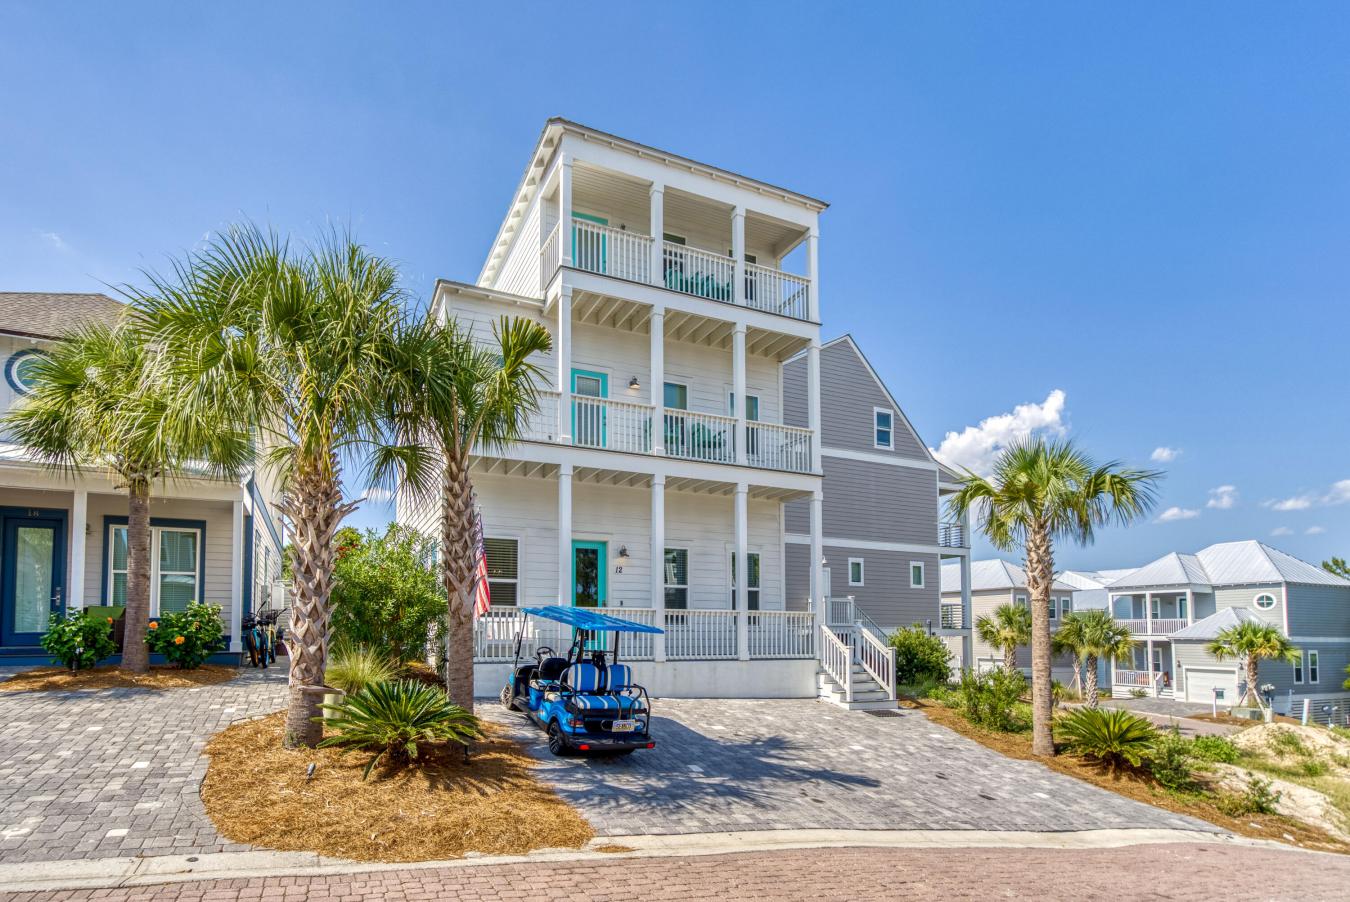 12 Clear, Santa Rosa Beach, Florida, 32459, United States, 3 Bedrooms Bedrooms, ,4 BathroomsBathrooms,Residential,For Sale,12 Clear,1492469